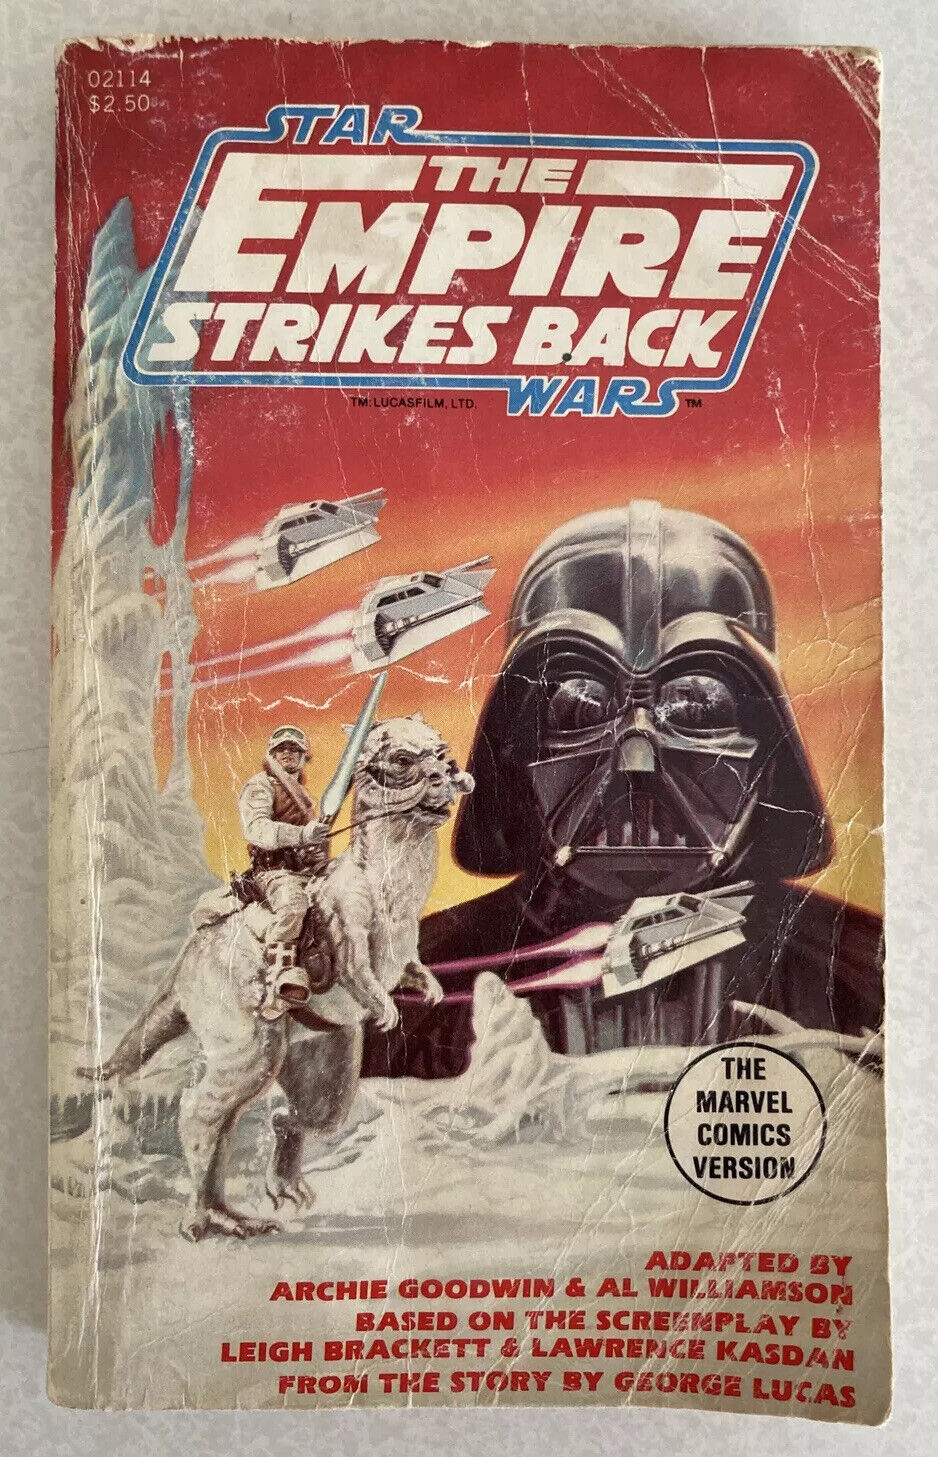 Star Wars The Empire Strikes Back The Marvel Comics Version, First Ed 1980 PB